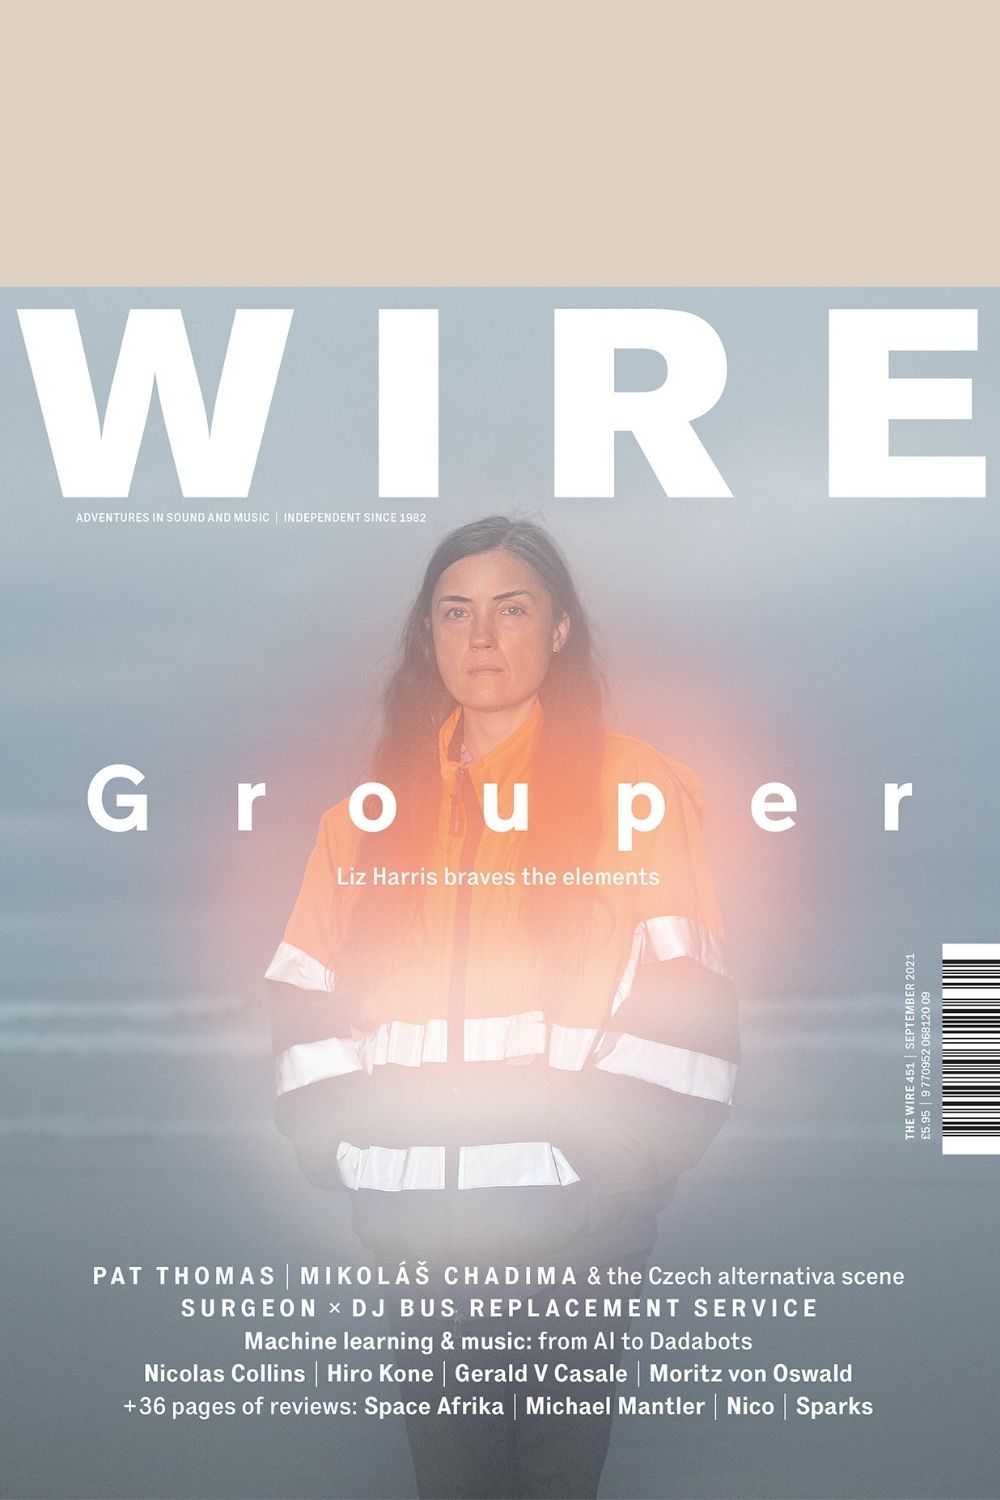 Front cover of The Wire magazine Issue 451